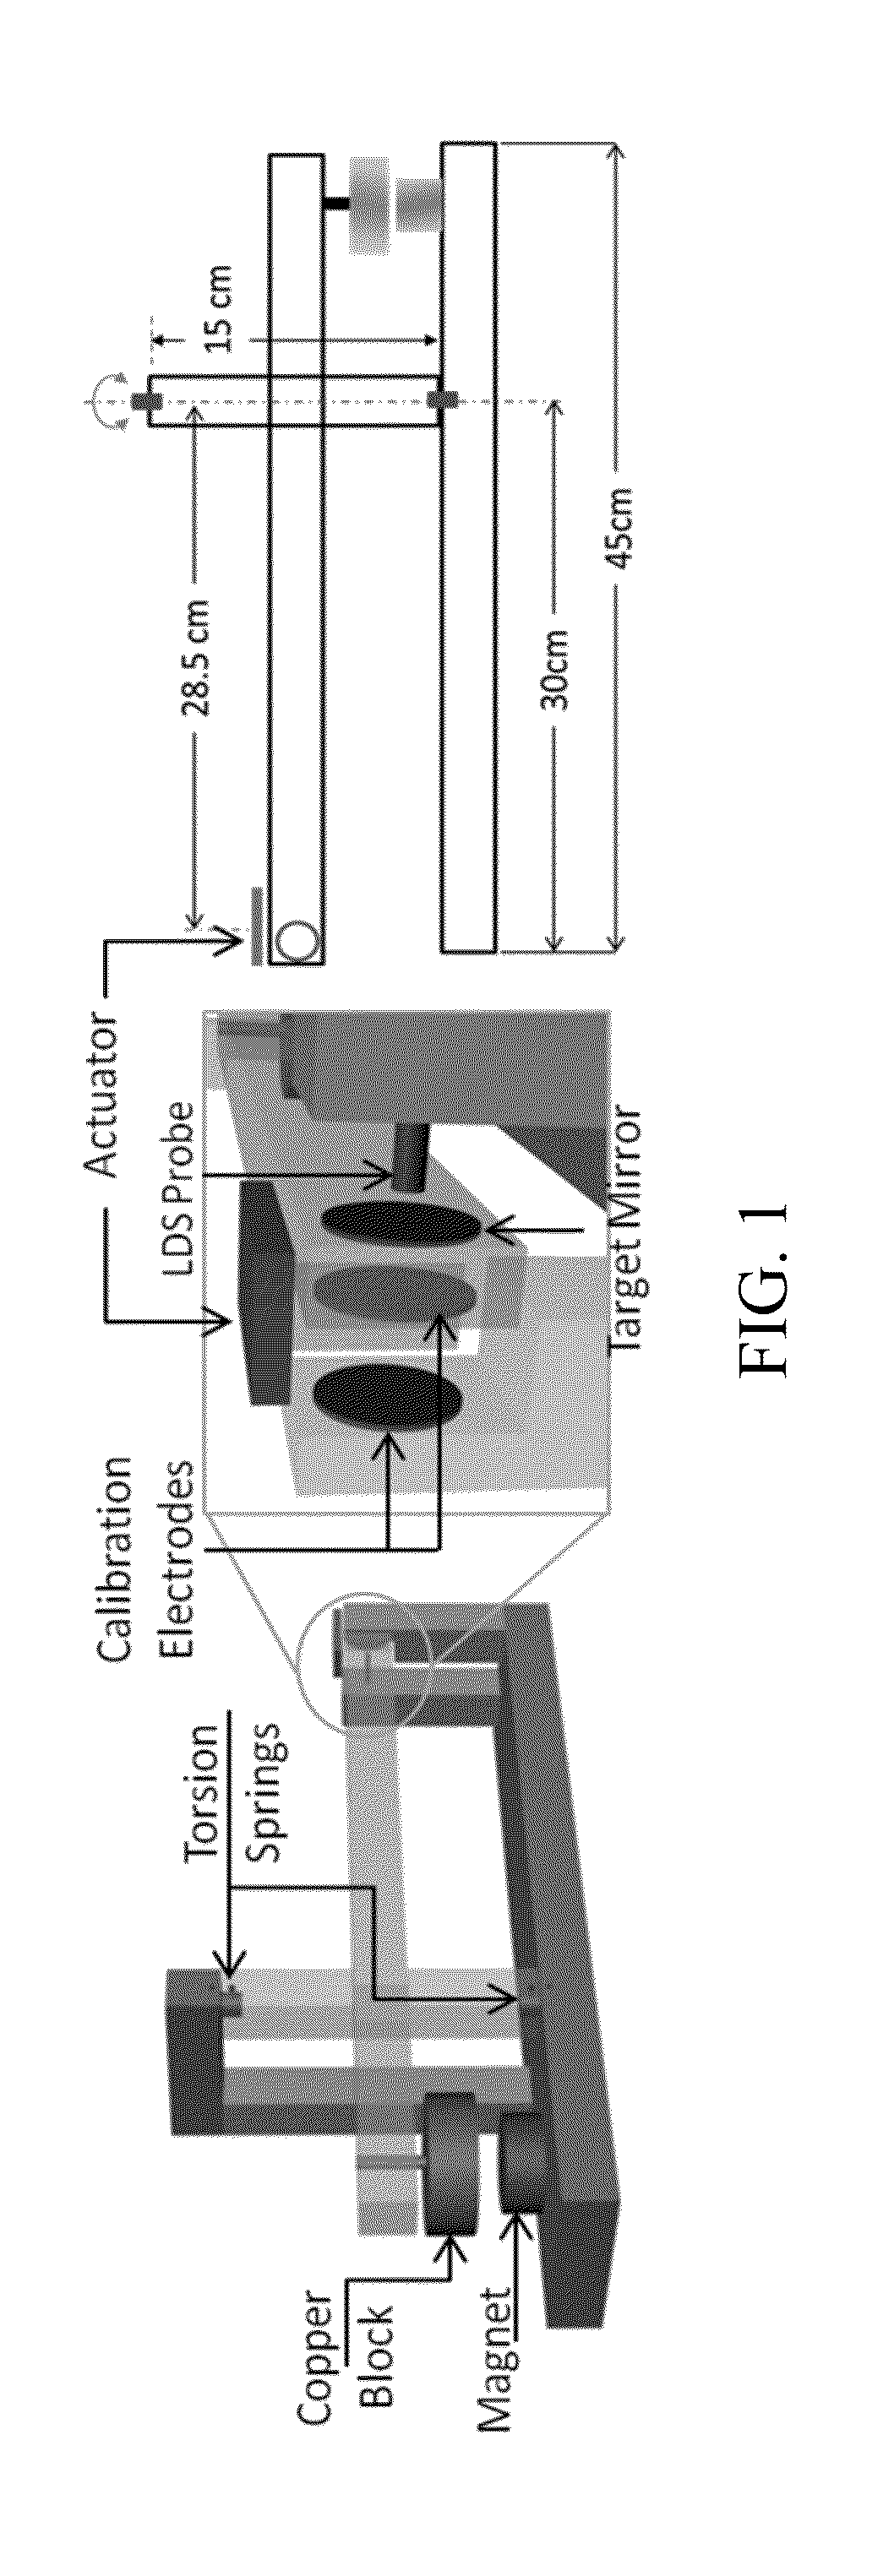 Method and Apparatus for Measuring Thrust